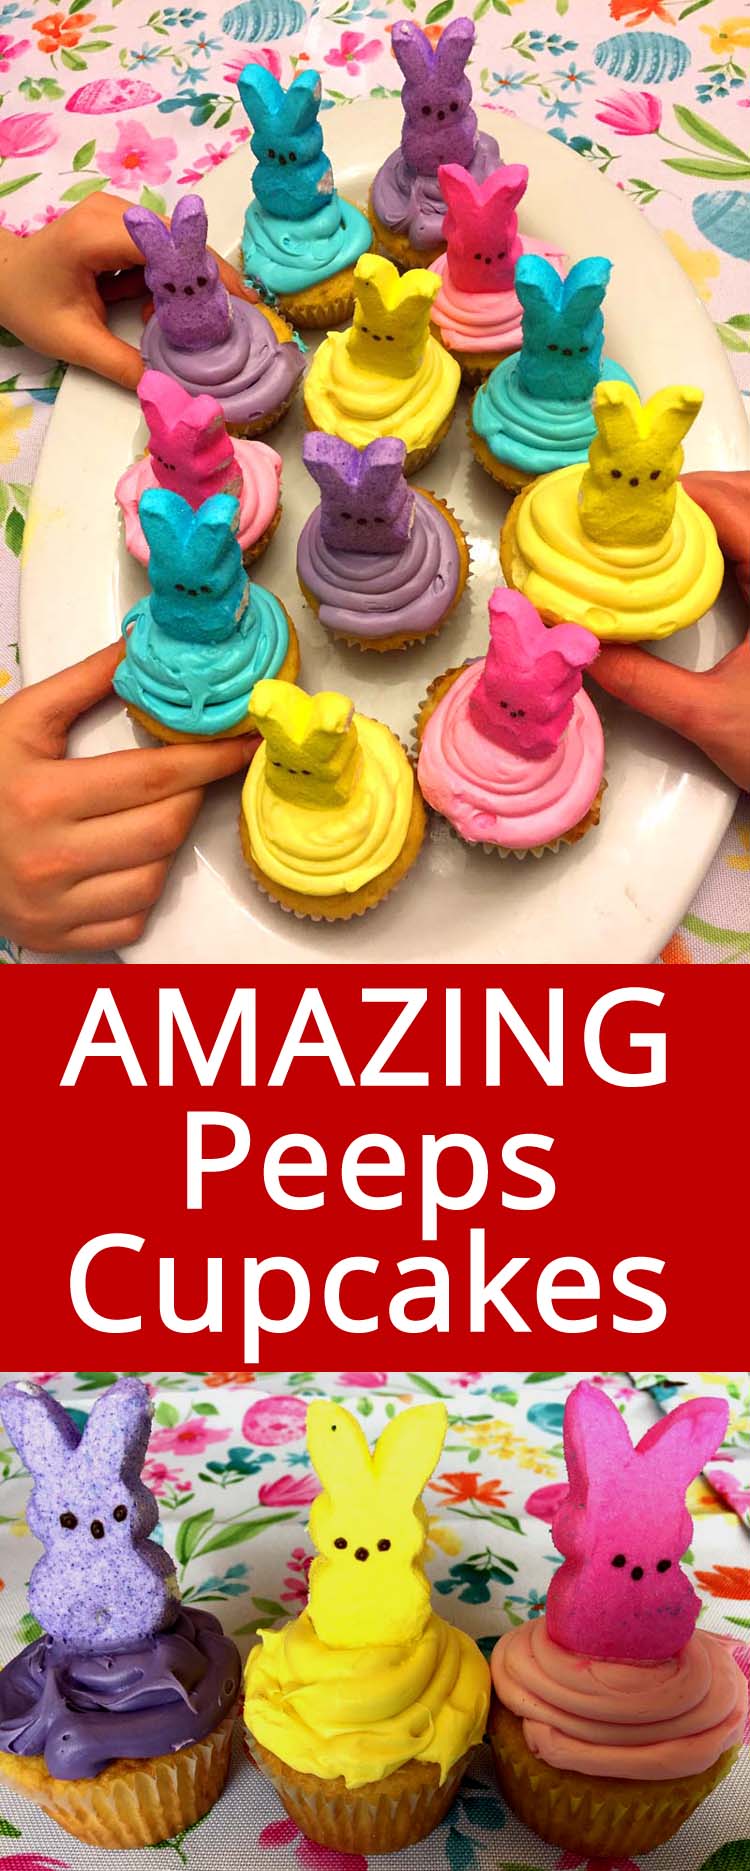 These peeps cupcakes are my go-to cupcakes for Easter! So easy to make, you just can\'t go wrong with these simple peeps cupcakes! Everyone loves them!